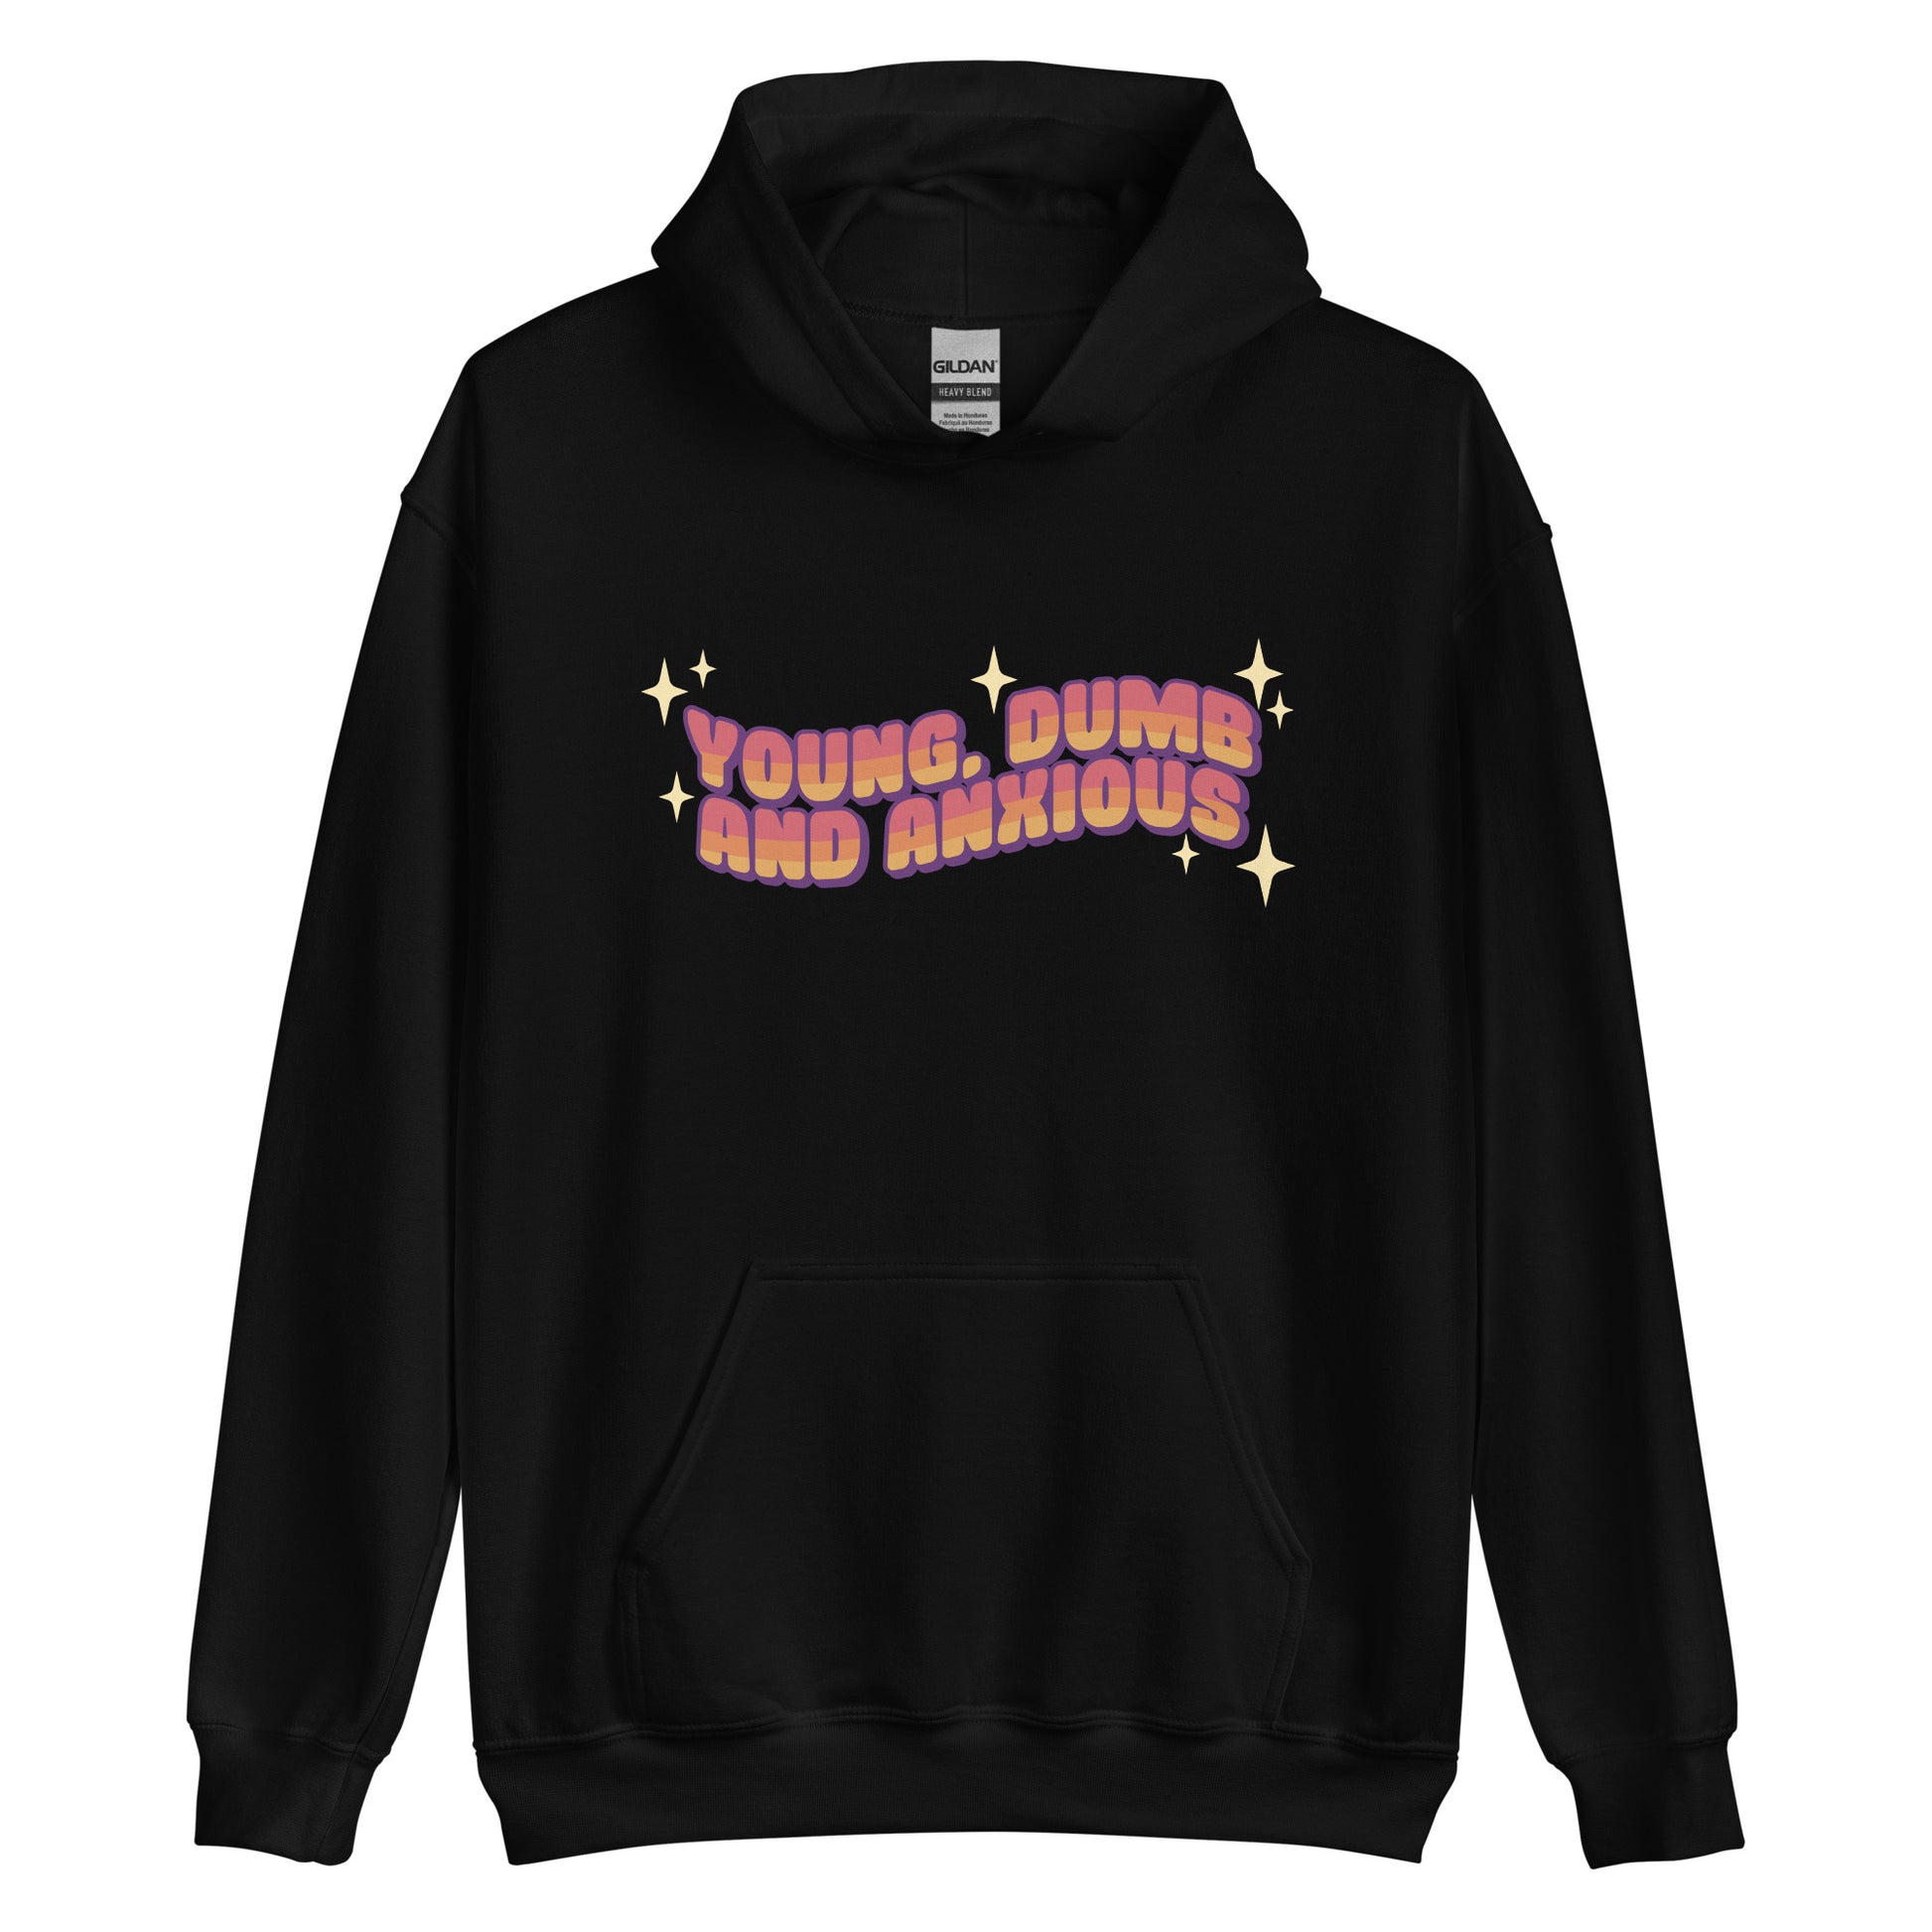 A black hooded sweatshirt featuring text in a pink-to-yellow gradient, surrounded by sparkles. The text reads "Young, dumb and anxious" in a blocky font.